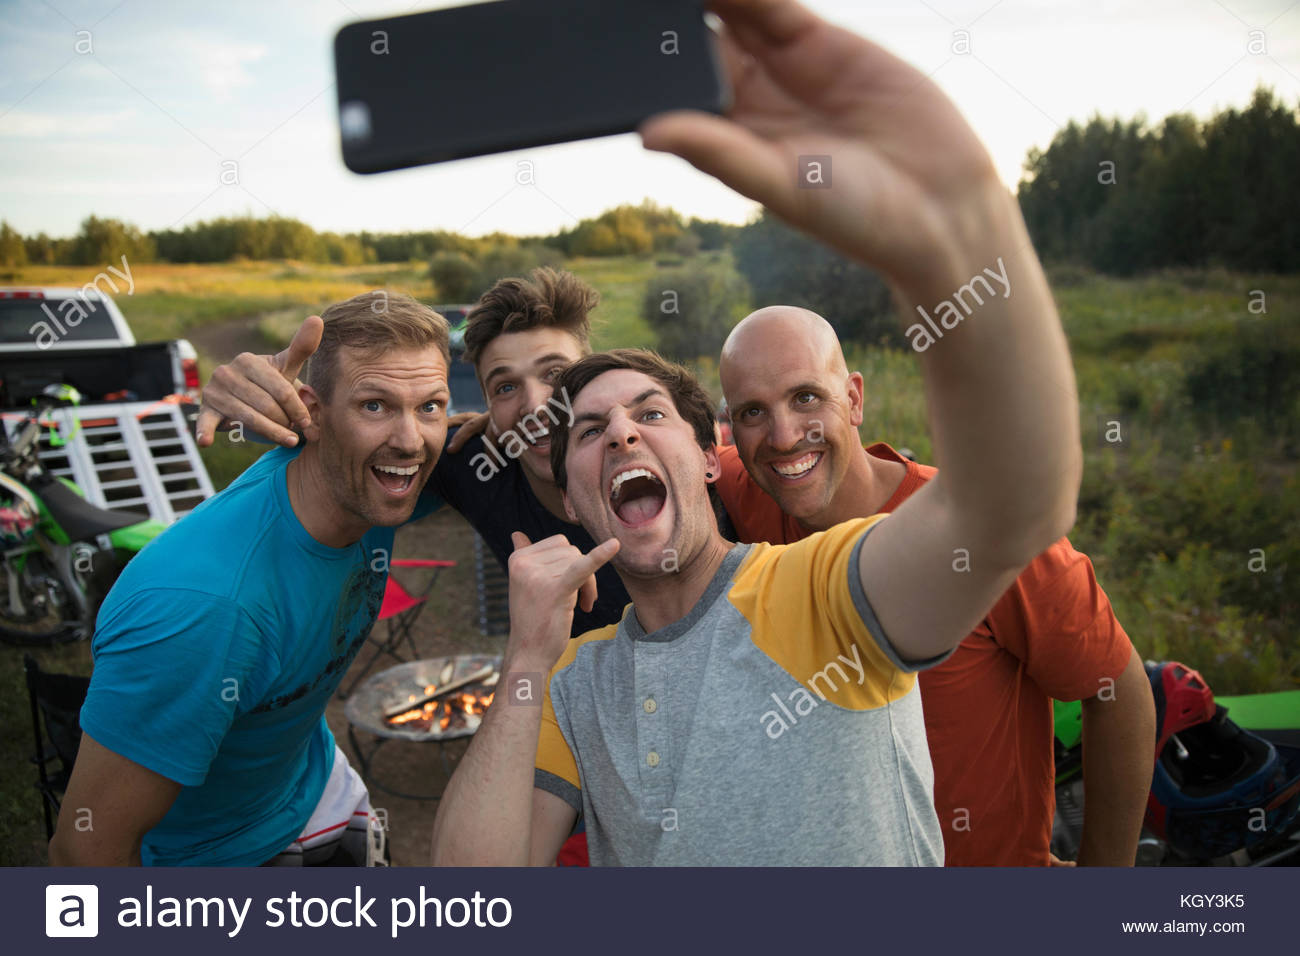 Enthusiastic male friends with camera phone taking selfie Stock Photo